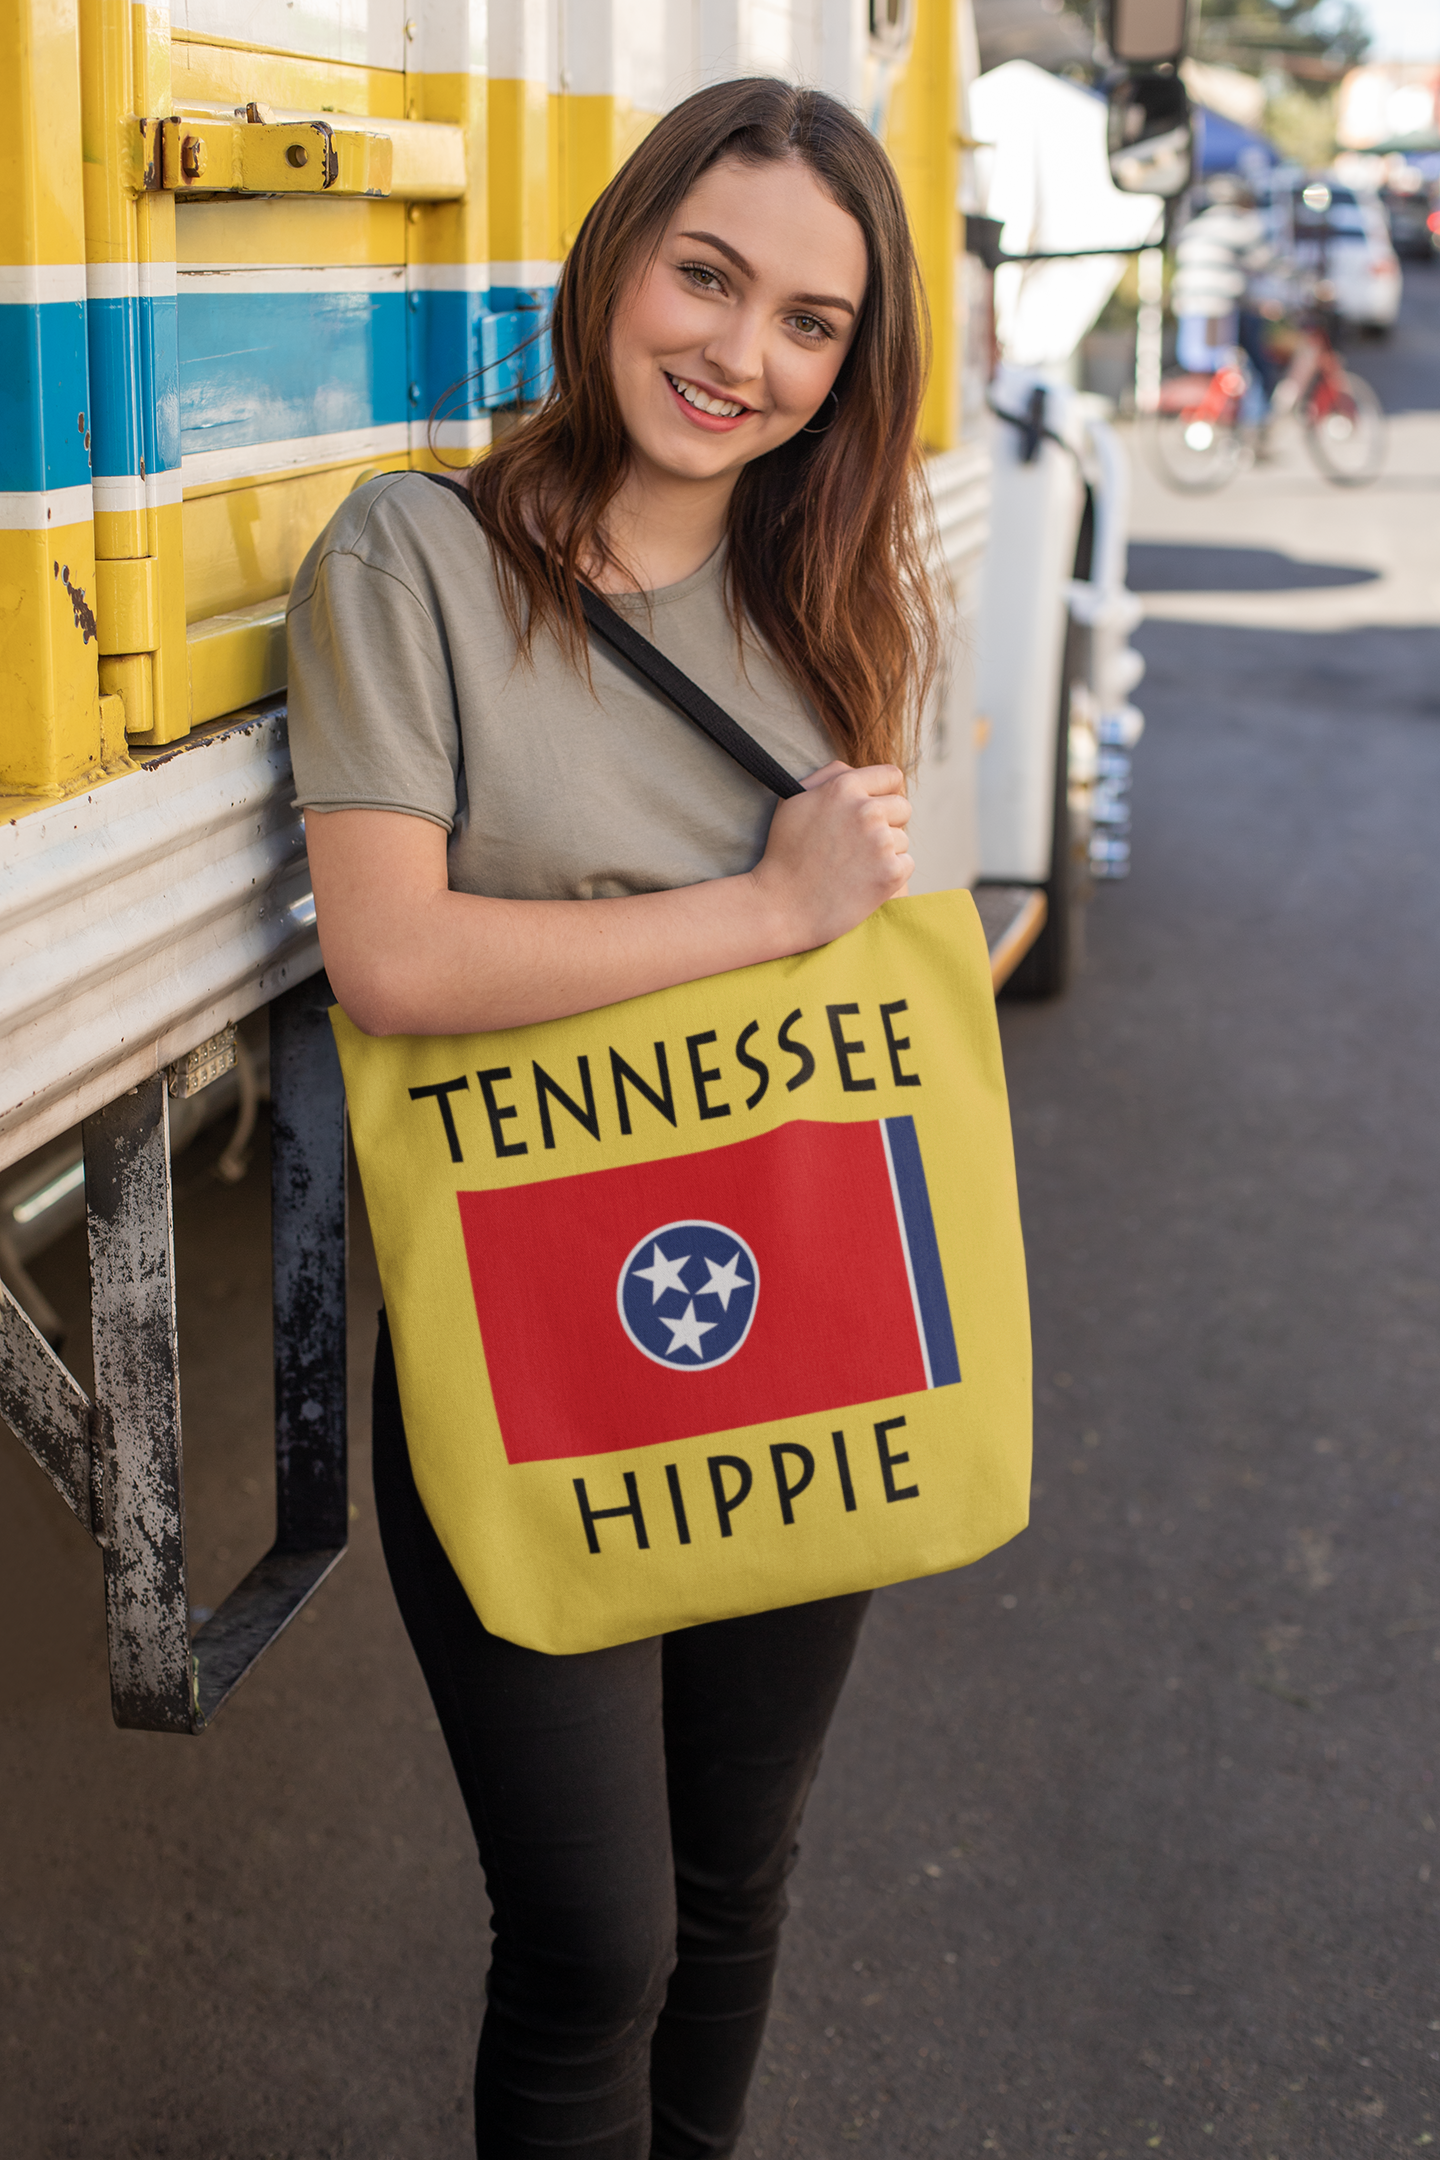   The Stately Wear Tennessee Flag Hippie tote bag has bold colors from the iconic Tennessee flag. Made with biodegradable inks & dyes and made one-at-a-time it is environmentally friendly. 3 different sizes to choose from so it is a great gym bag, beach bag, yoga bag, Pilates bag and travel bag.